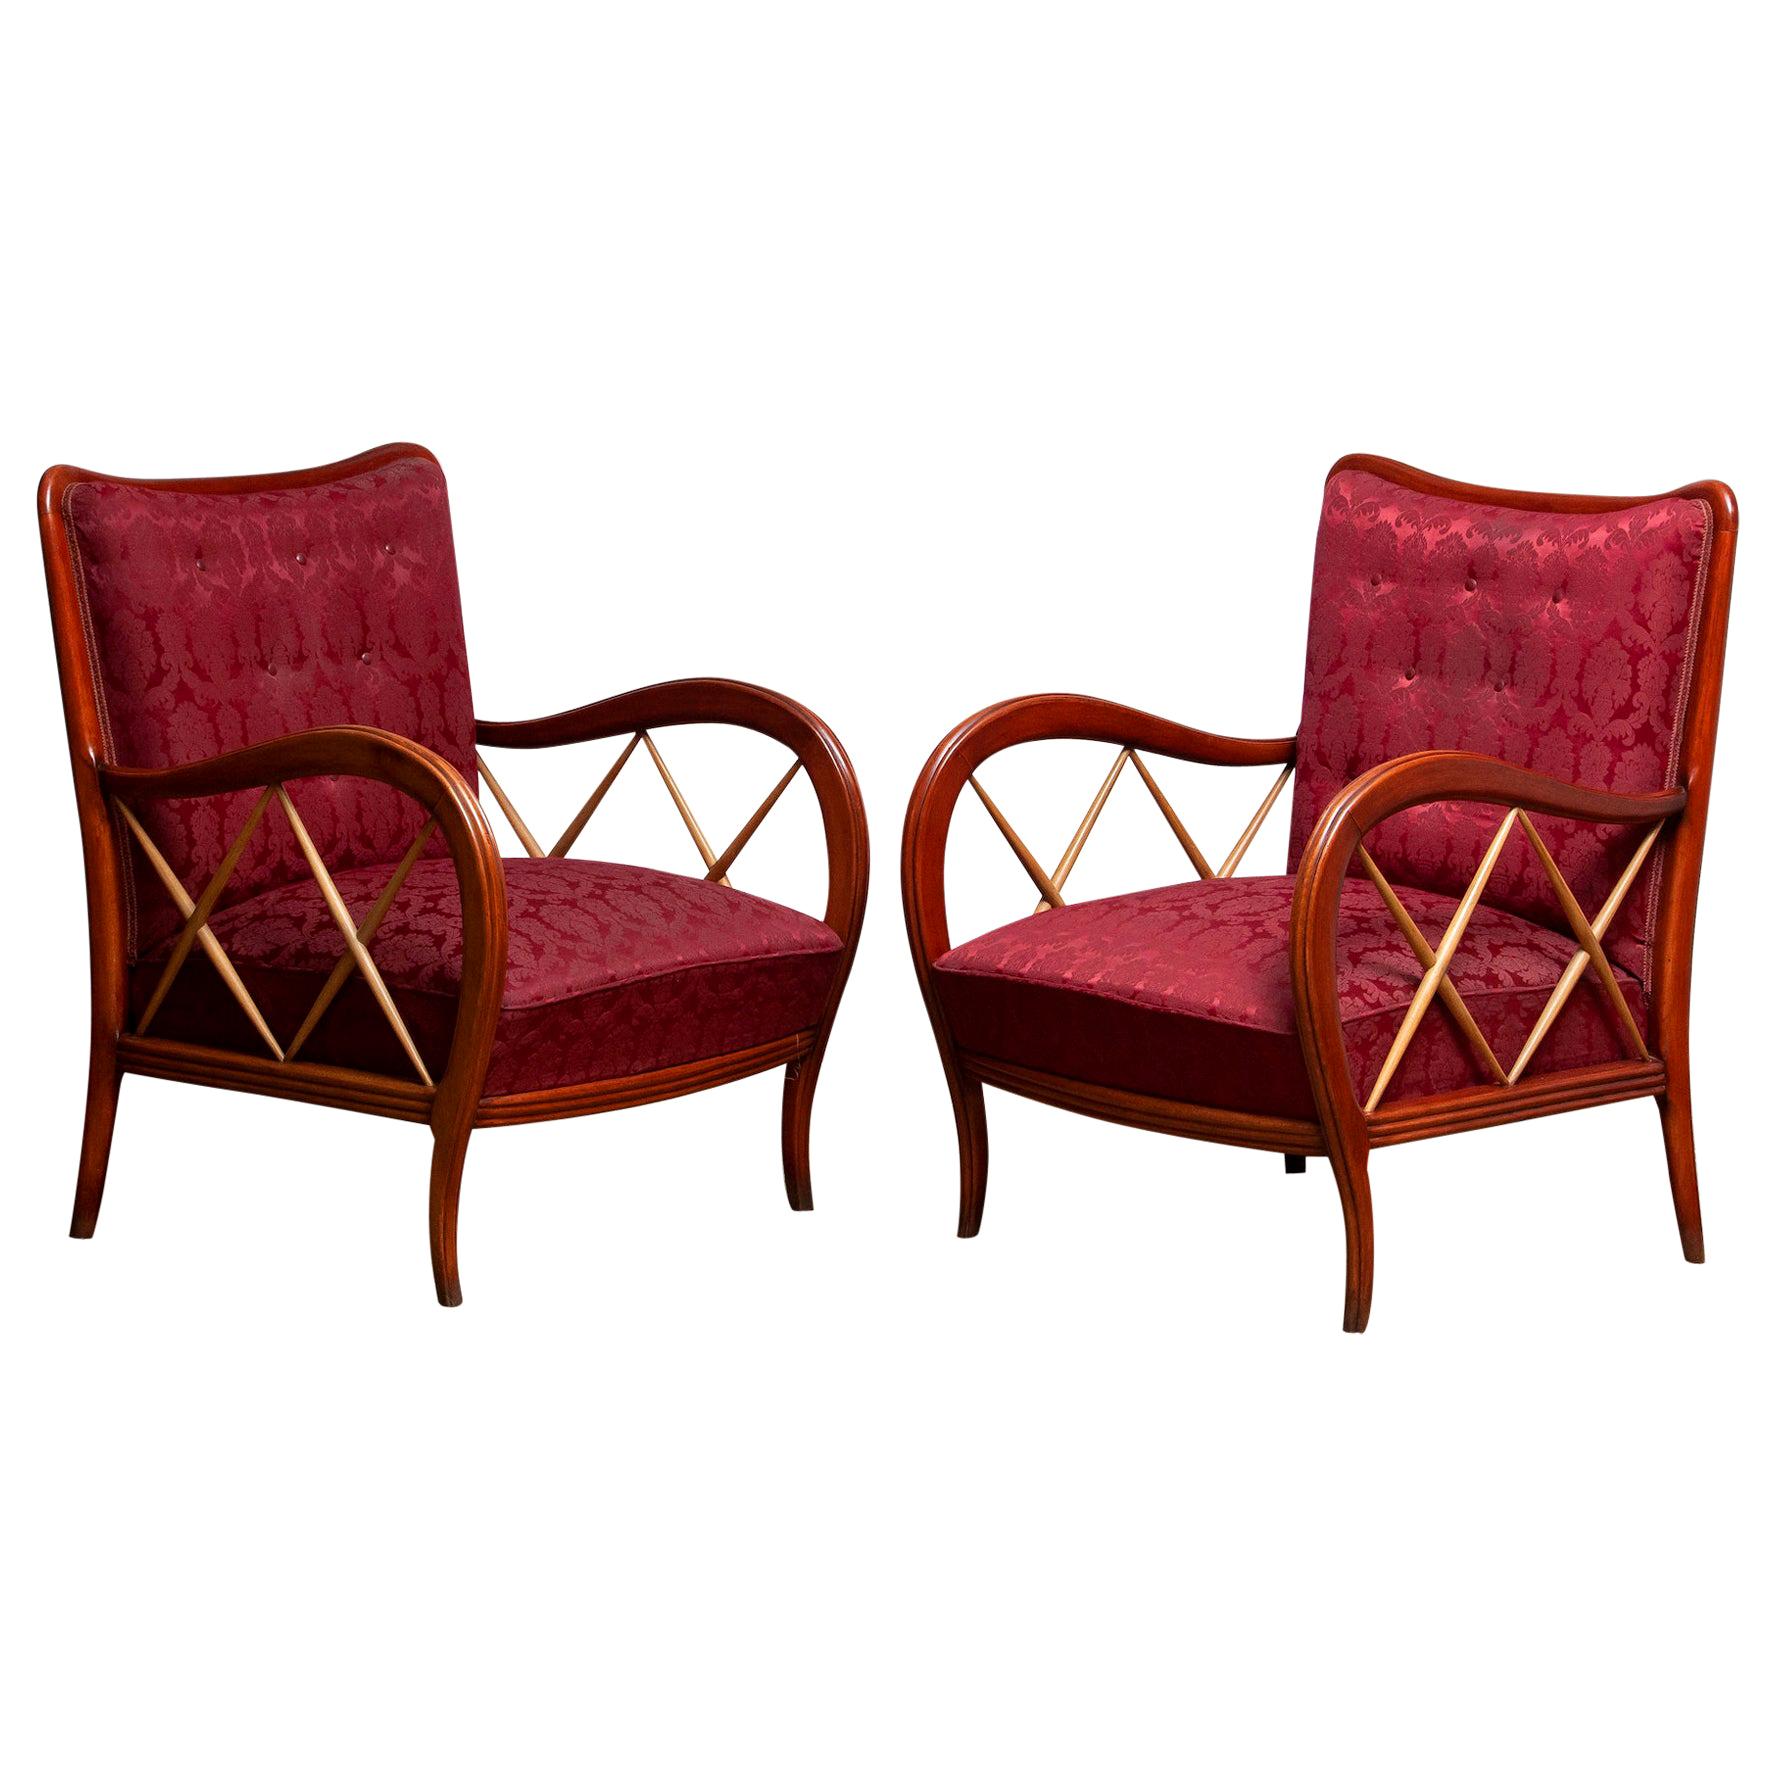 Set of two Italian lounge / easy chairs by Paolo Buffa from the 1940s.
The condition is original and still good.